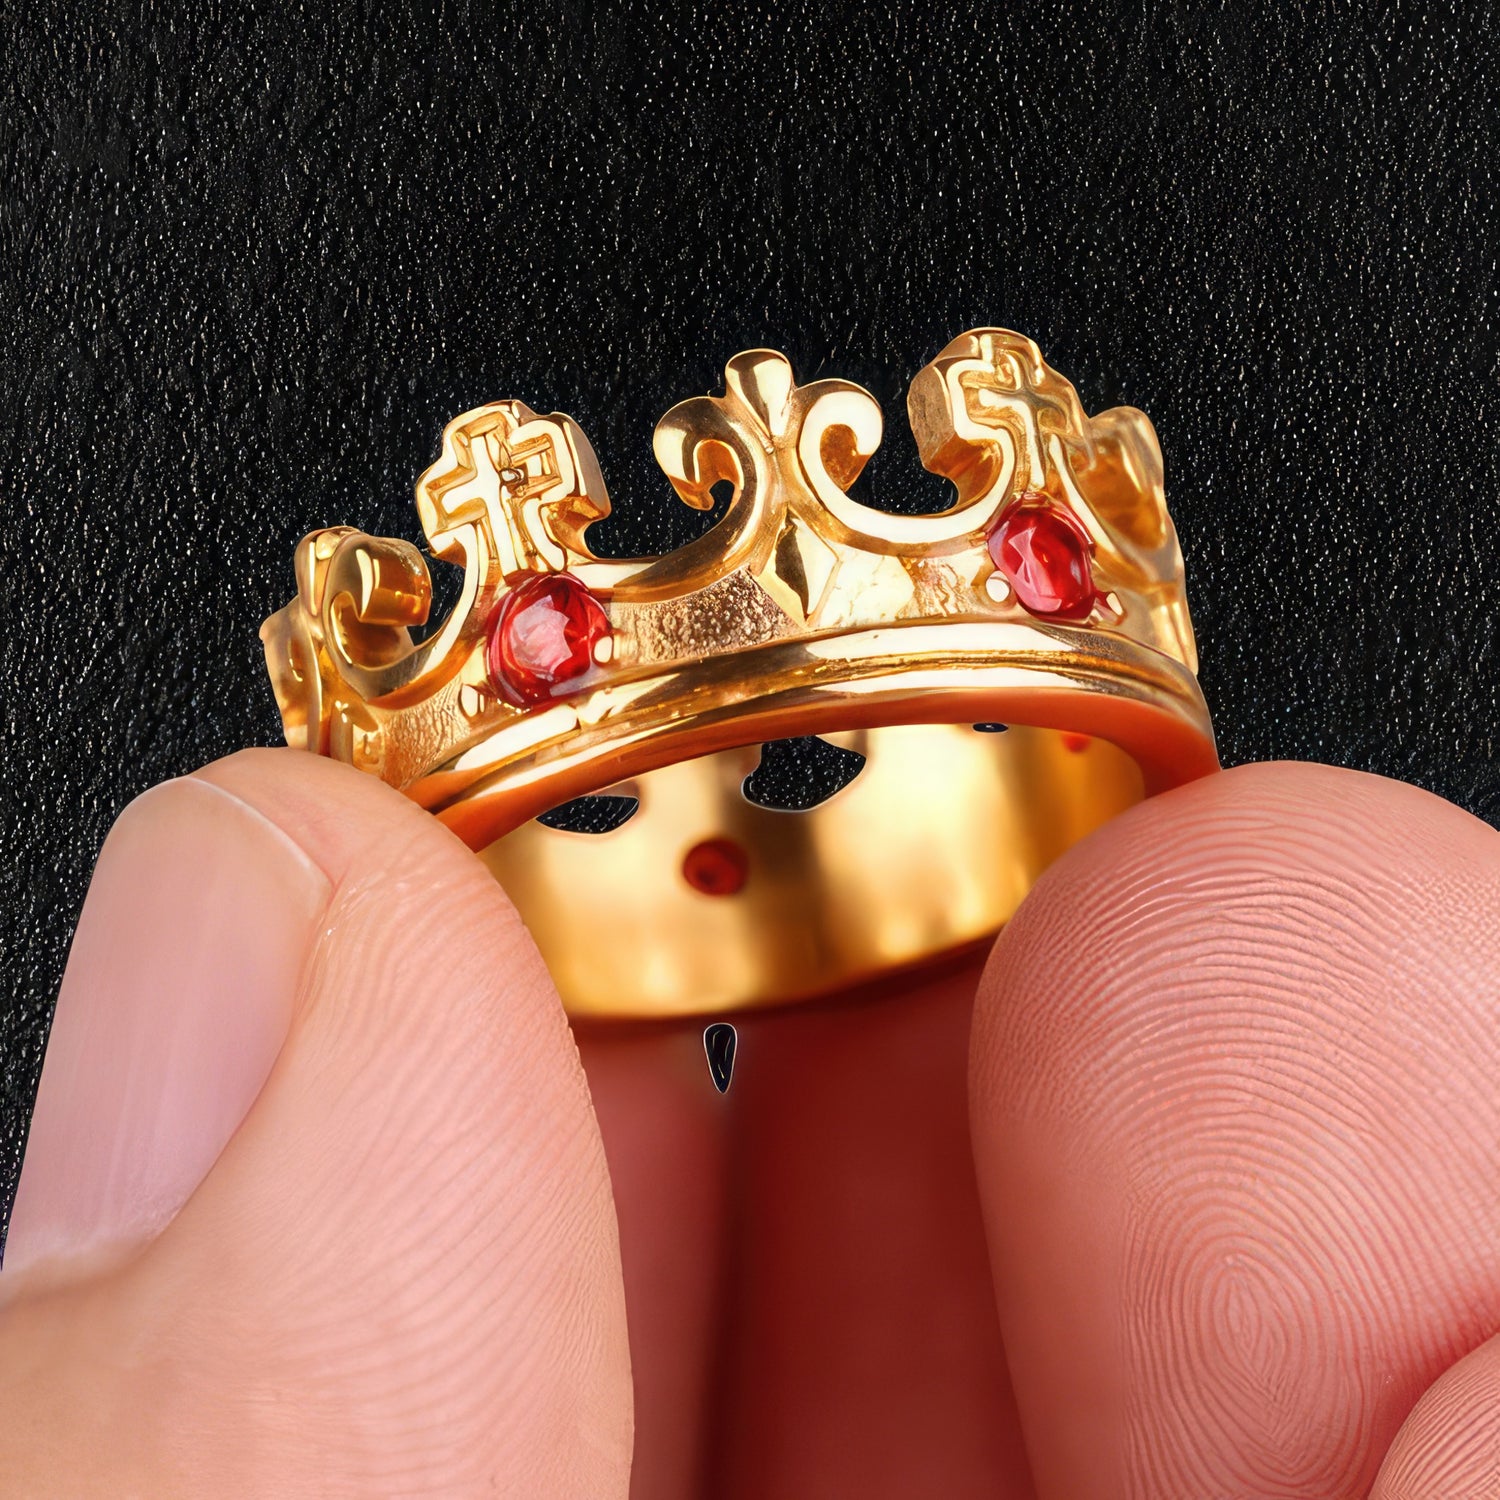 Queen Silver Crown Ring | Floral Fawna